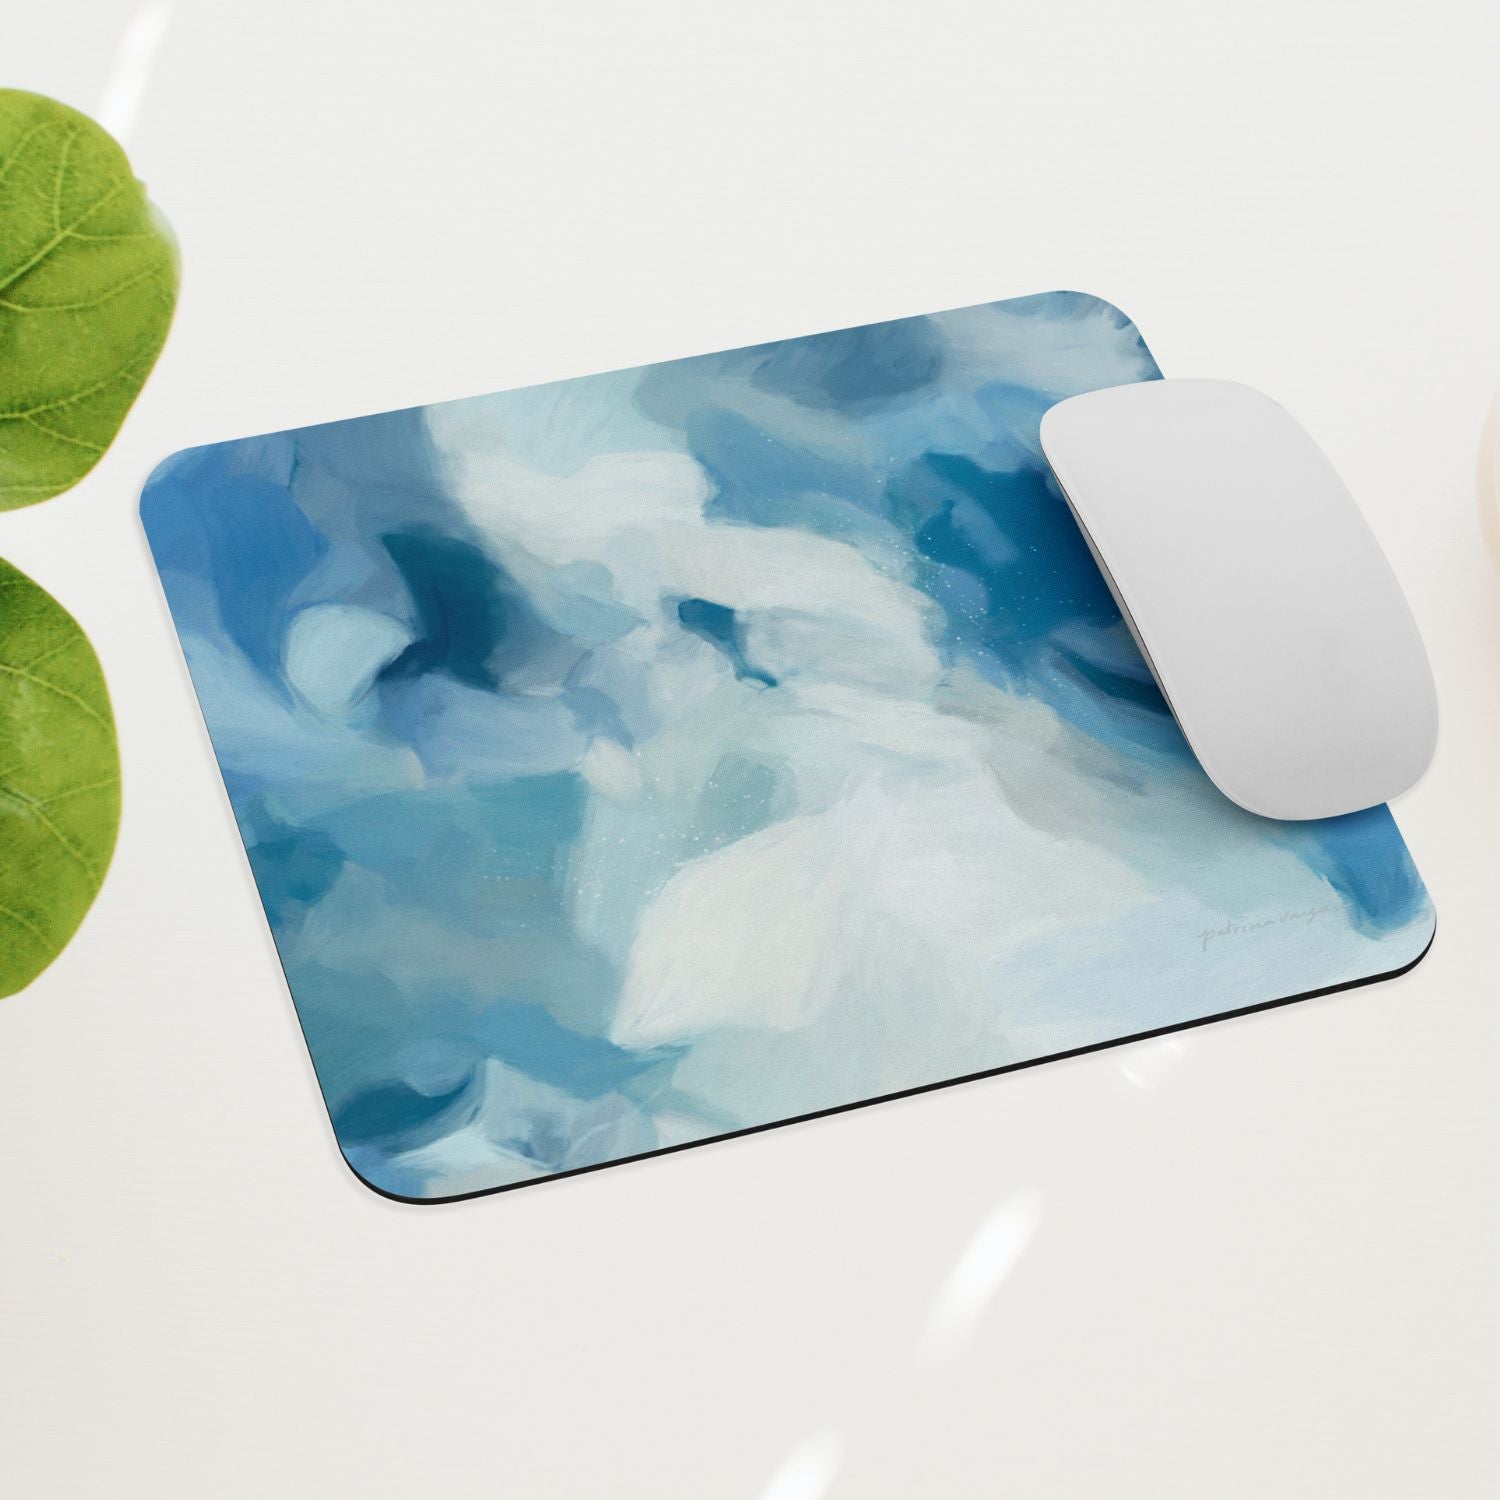 Liviana, blue mouse pad for styling your office desk. Featuring artwork by Parima Studio. Home office styling accessories, cubicle styling accessories.